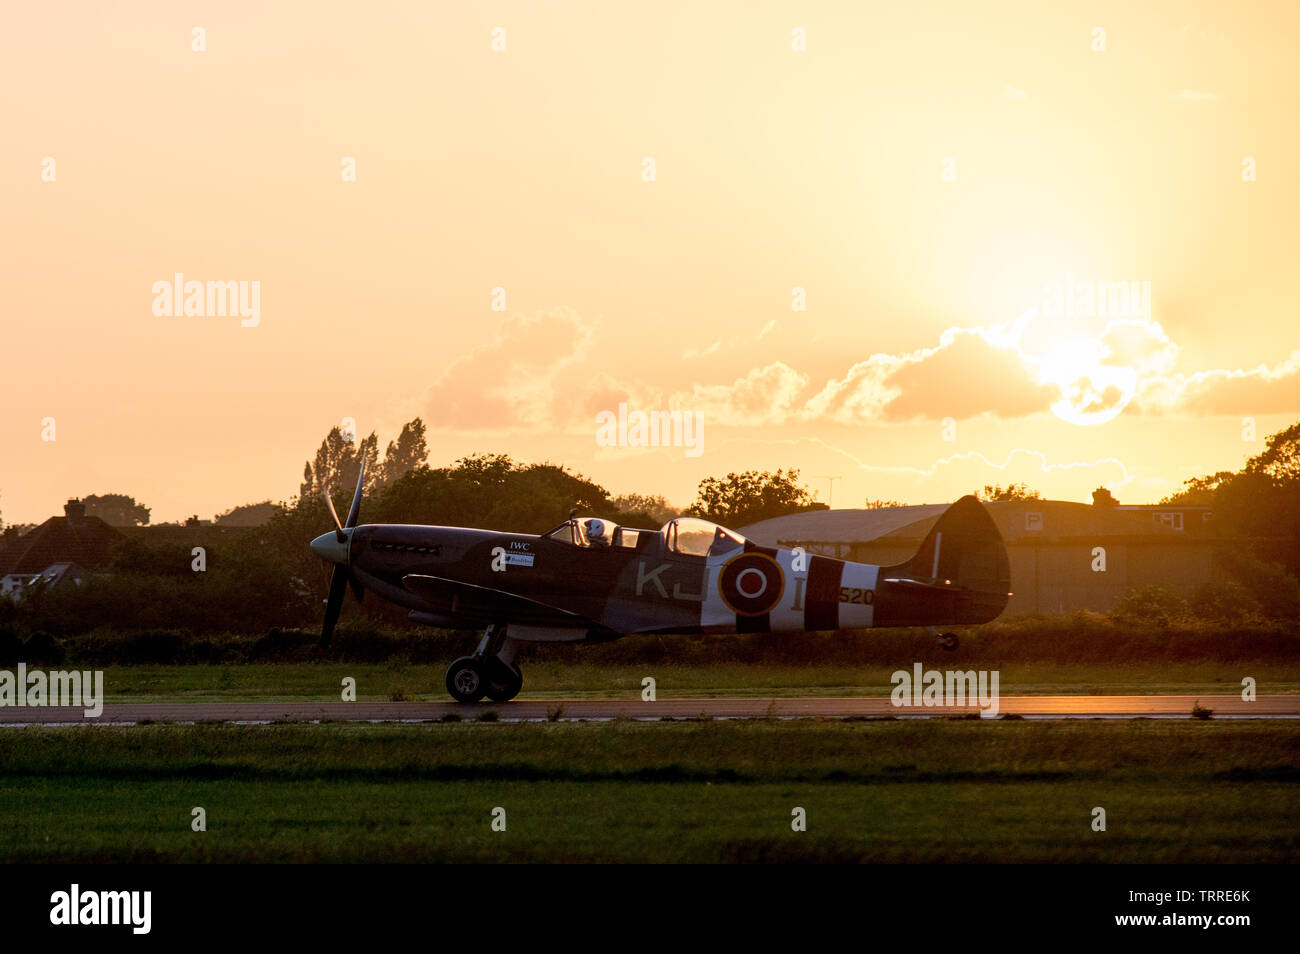 Spitfire SM520  taking off in the sunset Stock Photo